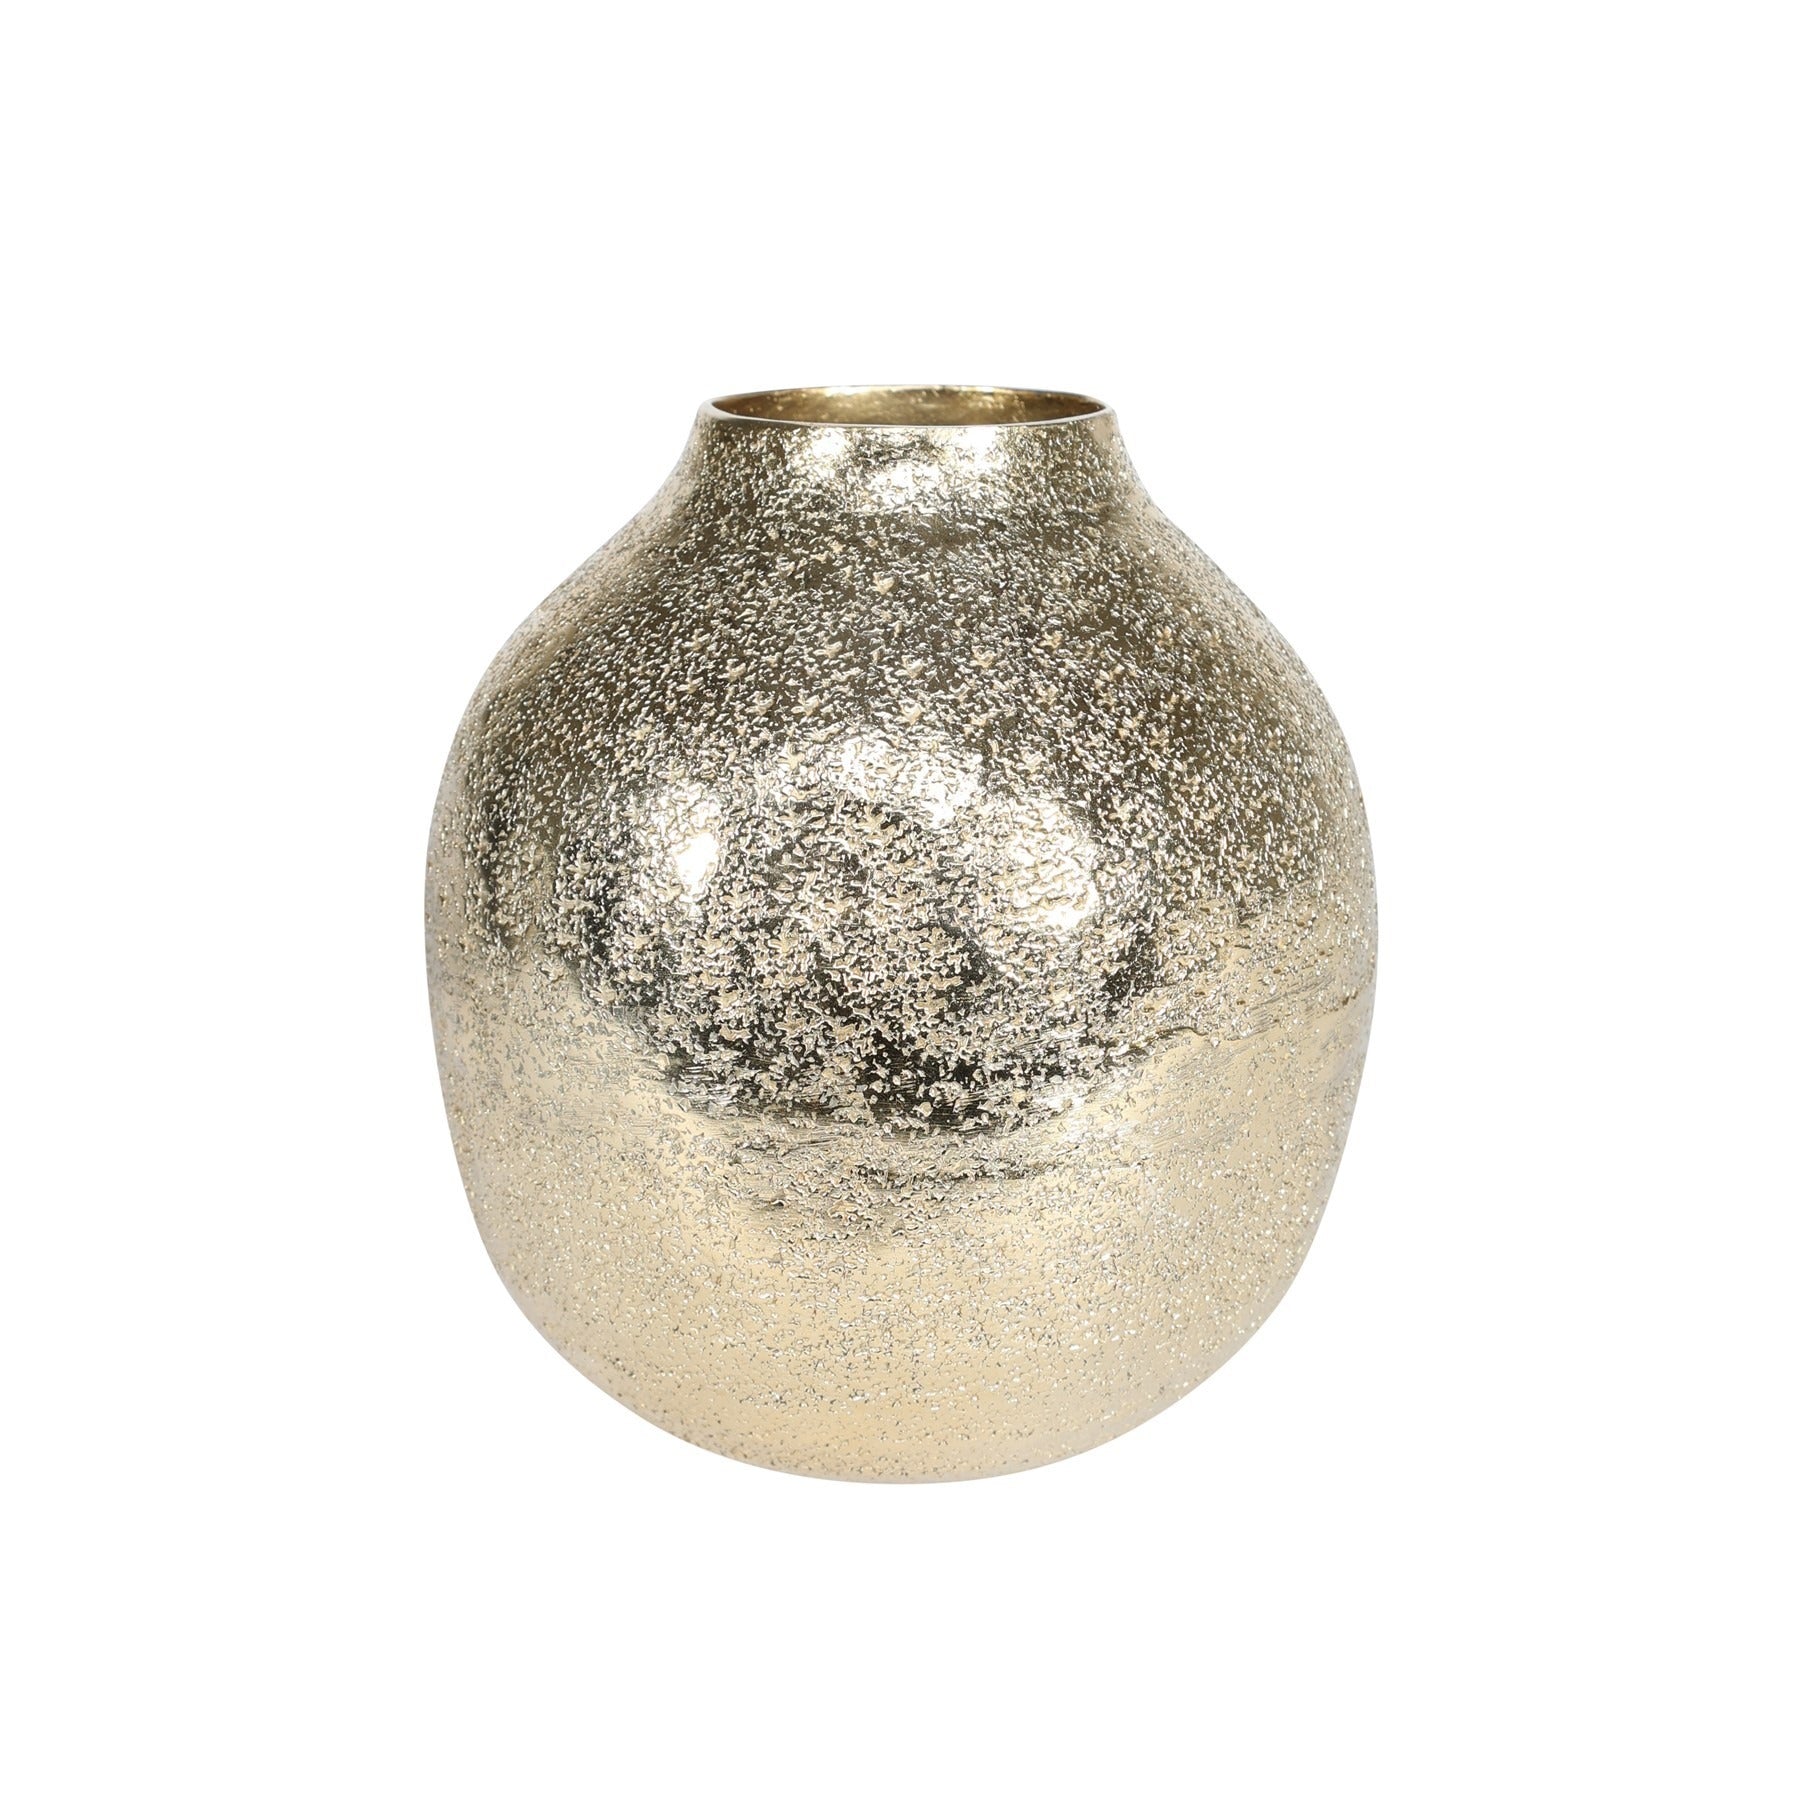 View Covent Garden Cafe Vase Bright Gold H11cm information